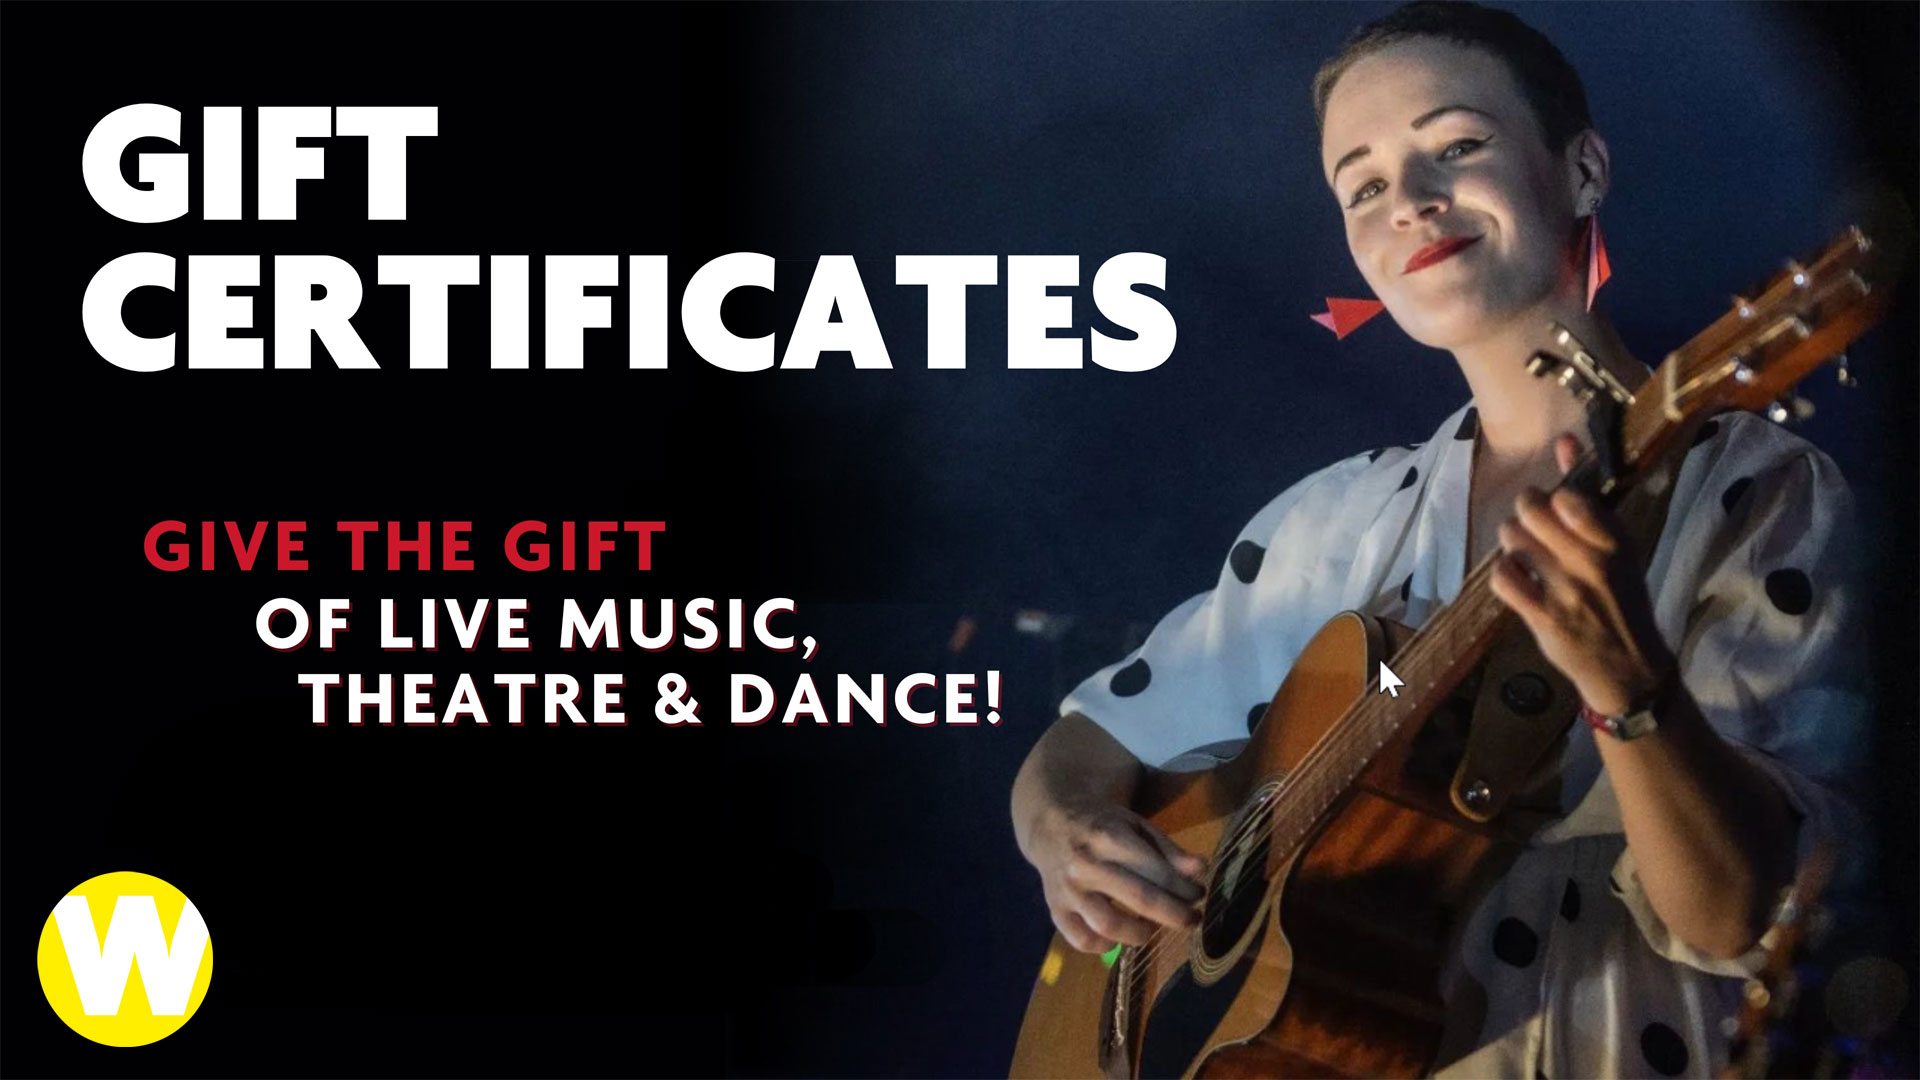 Gift Certificates: Give the gift of live music, theatre & dance!